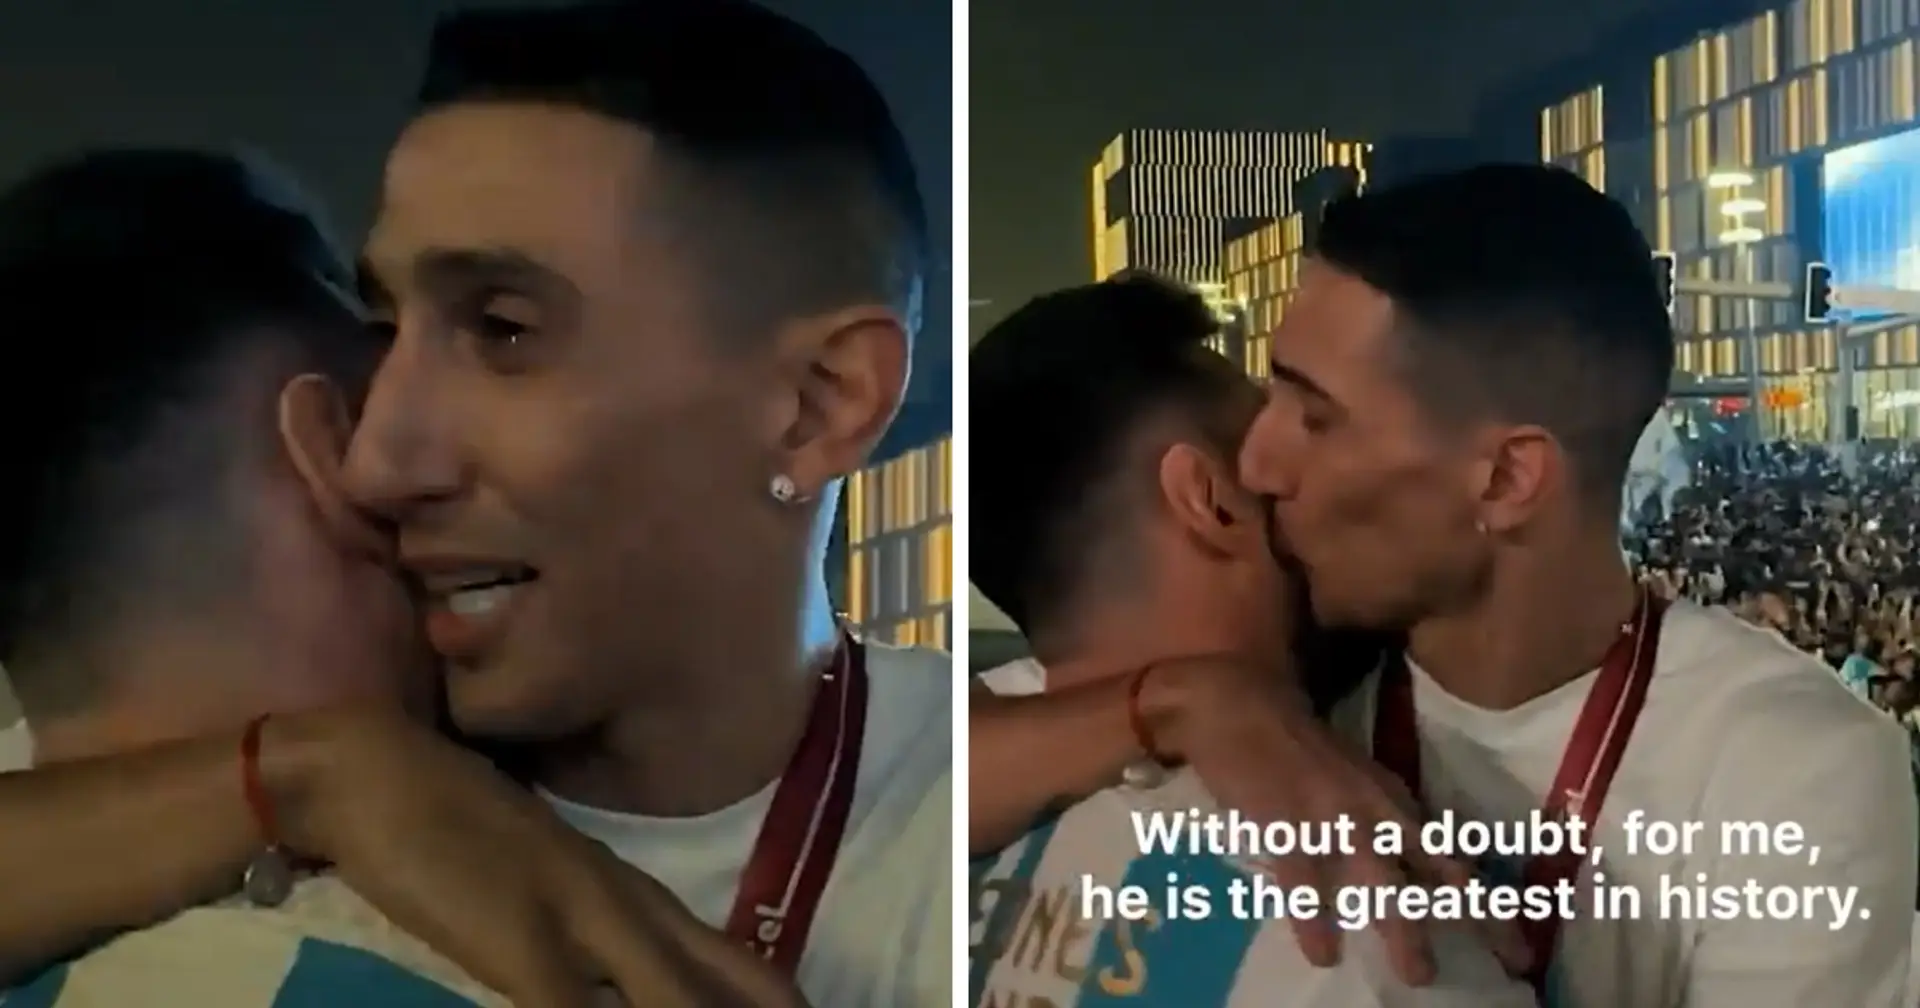 New footage reveals touching moment between Lionel Messi and Angel Di Maria after World Cup victory